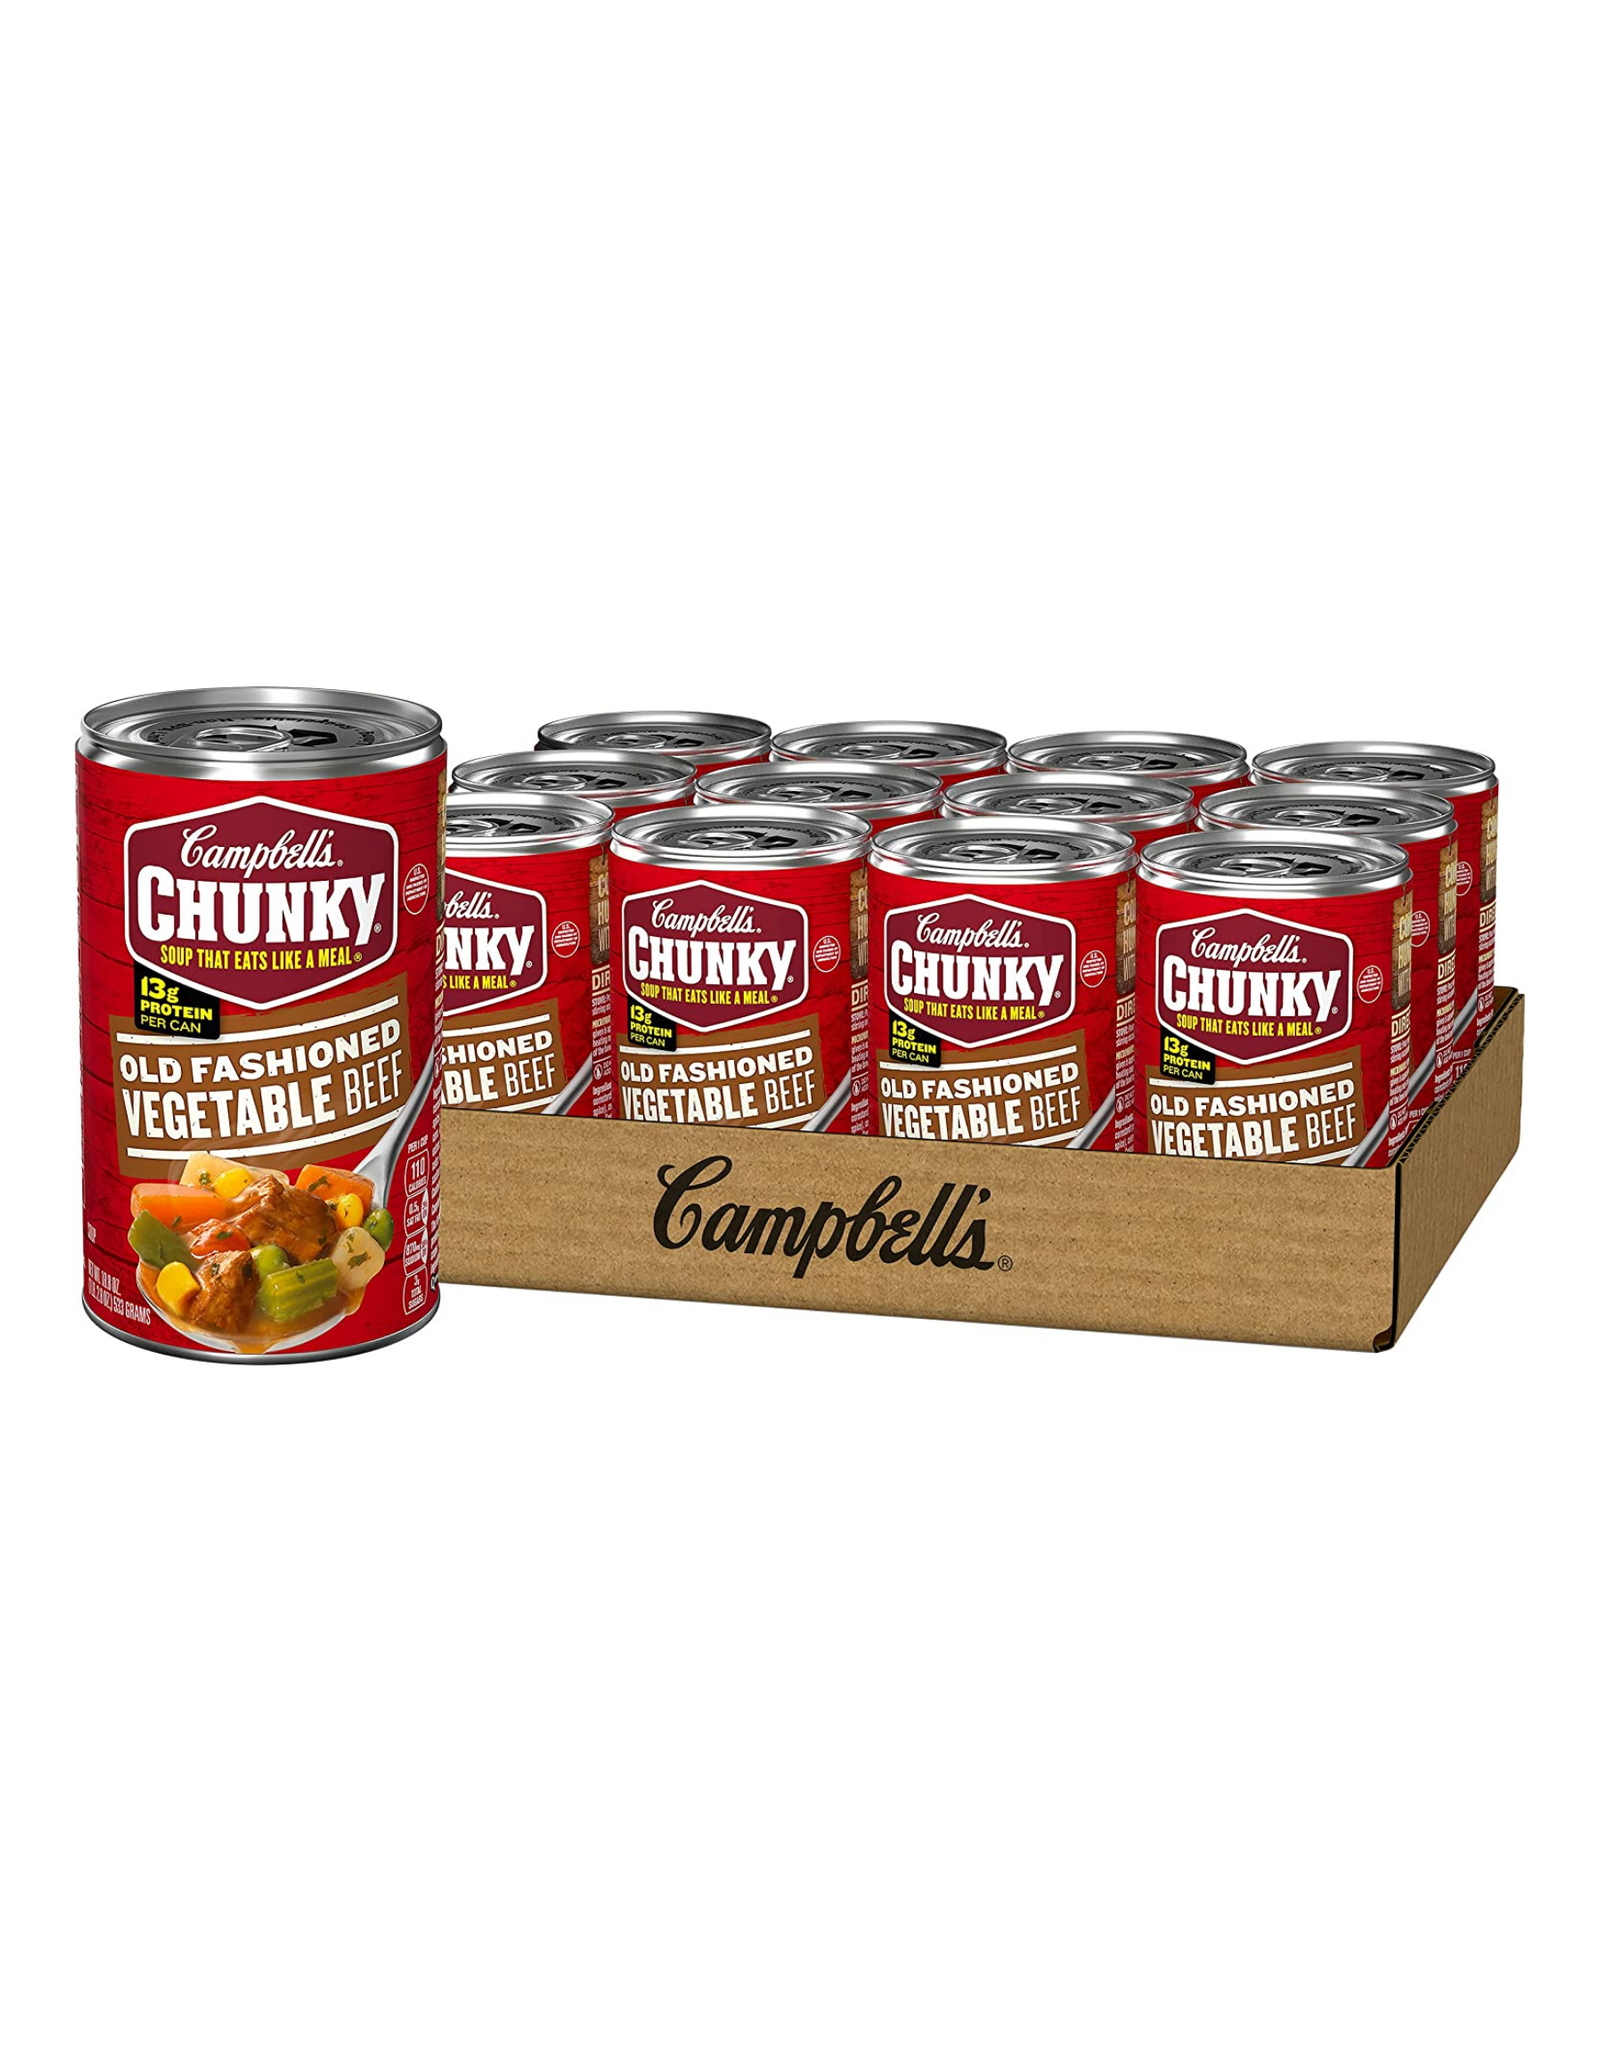 Campbell's Chunky Soup, Old Fashioned Vegetable Beef Soup, 18.8 oz, 12 Cans